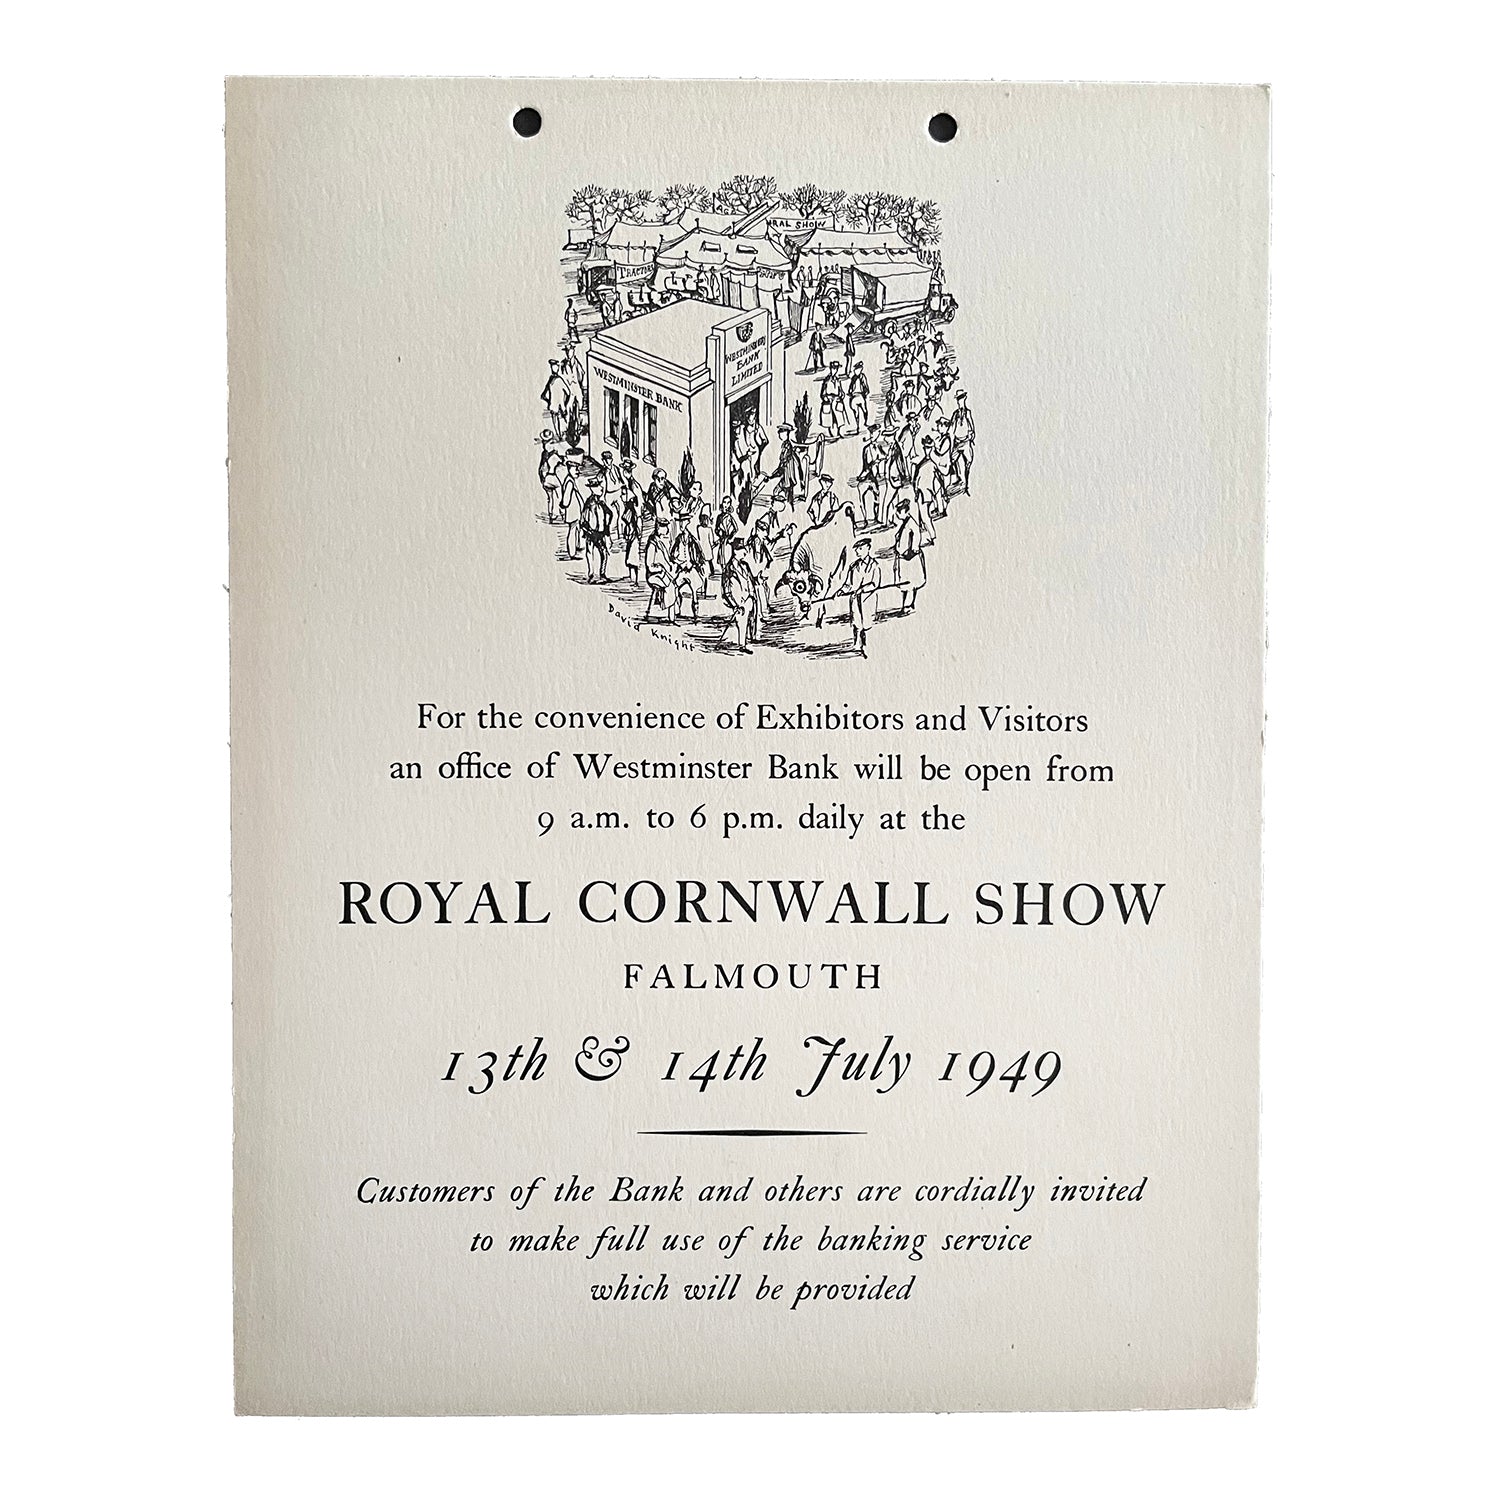 hanging card exhibitor notice published by the Westminster Bank for display at the Royal Cornwall Show, 1949. Includes a charming illustration by Donald Knight of the Bank’s mobile trade stand in the midst of a busy country fair